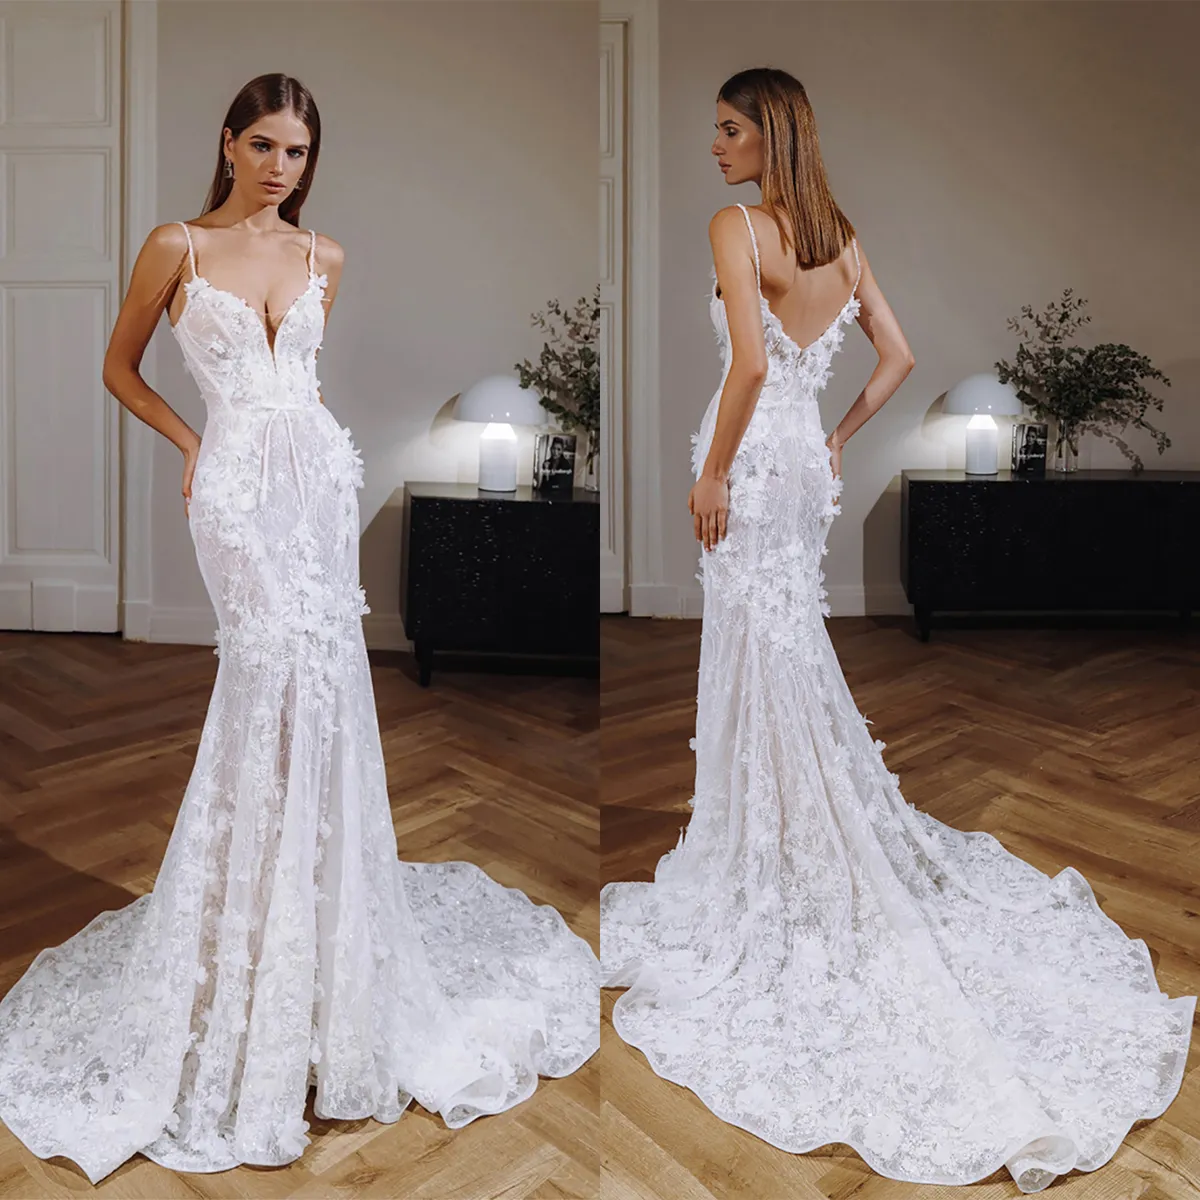 Classic Lace Mermaid Wedding Dresses Spaghetti Straps Bridal Gowns 3D-Floral Appliques Sleeveless Bride Dresses Custom Made